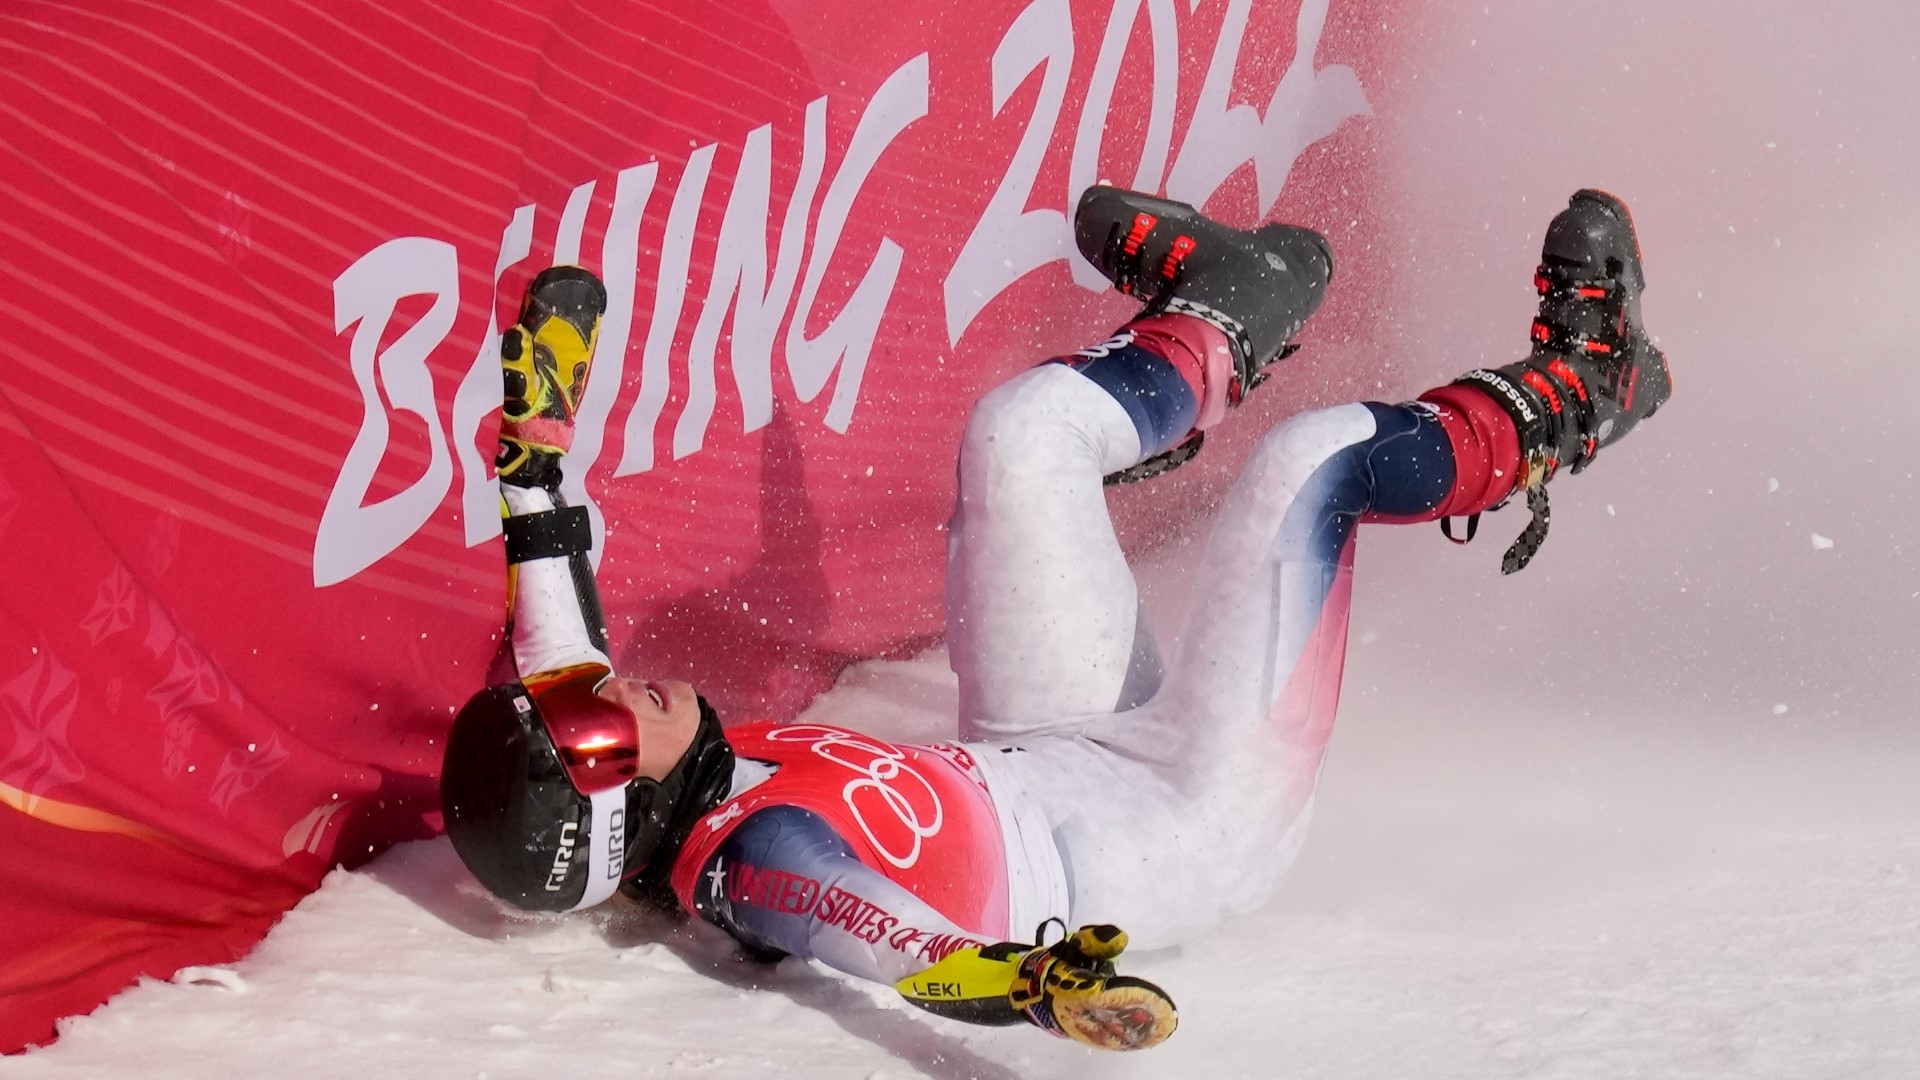 American alpine skier Nina O'Brien was involved in a hard crash at the end of her second run in the women's giant slalom and was down for several minutes.